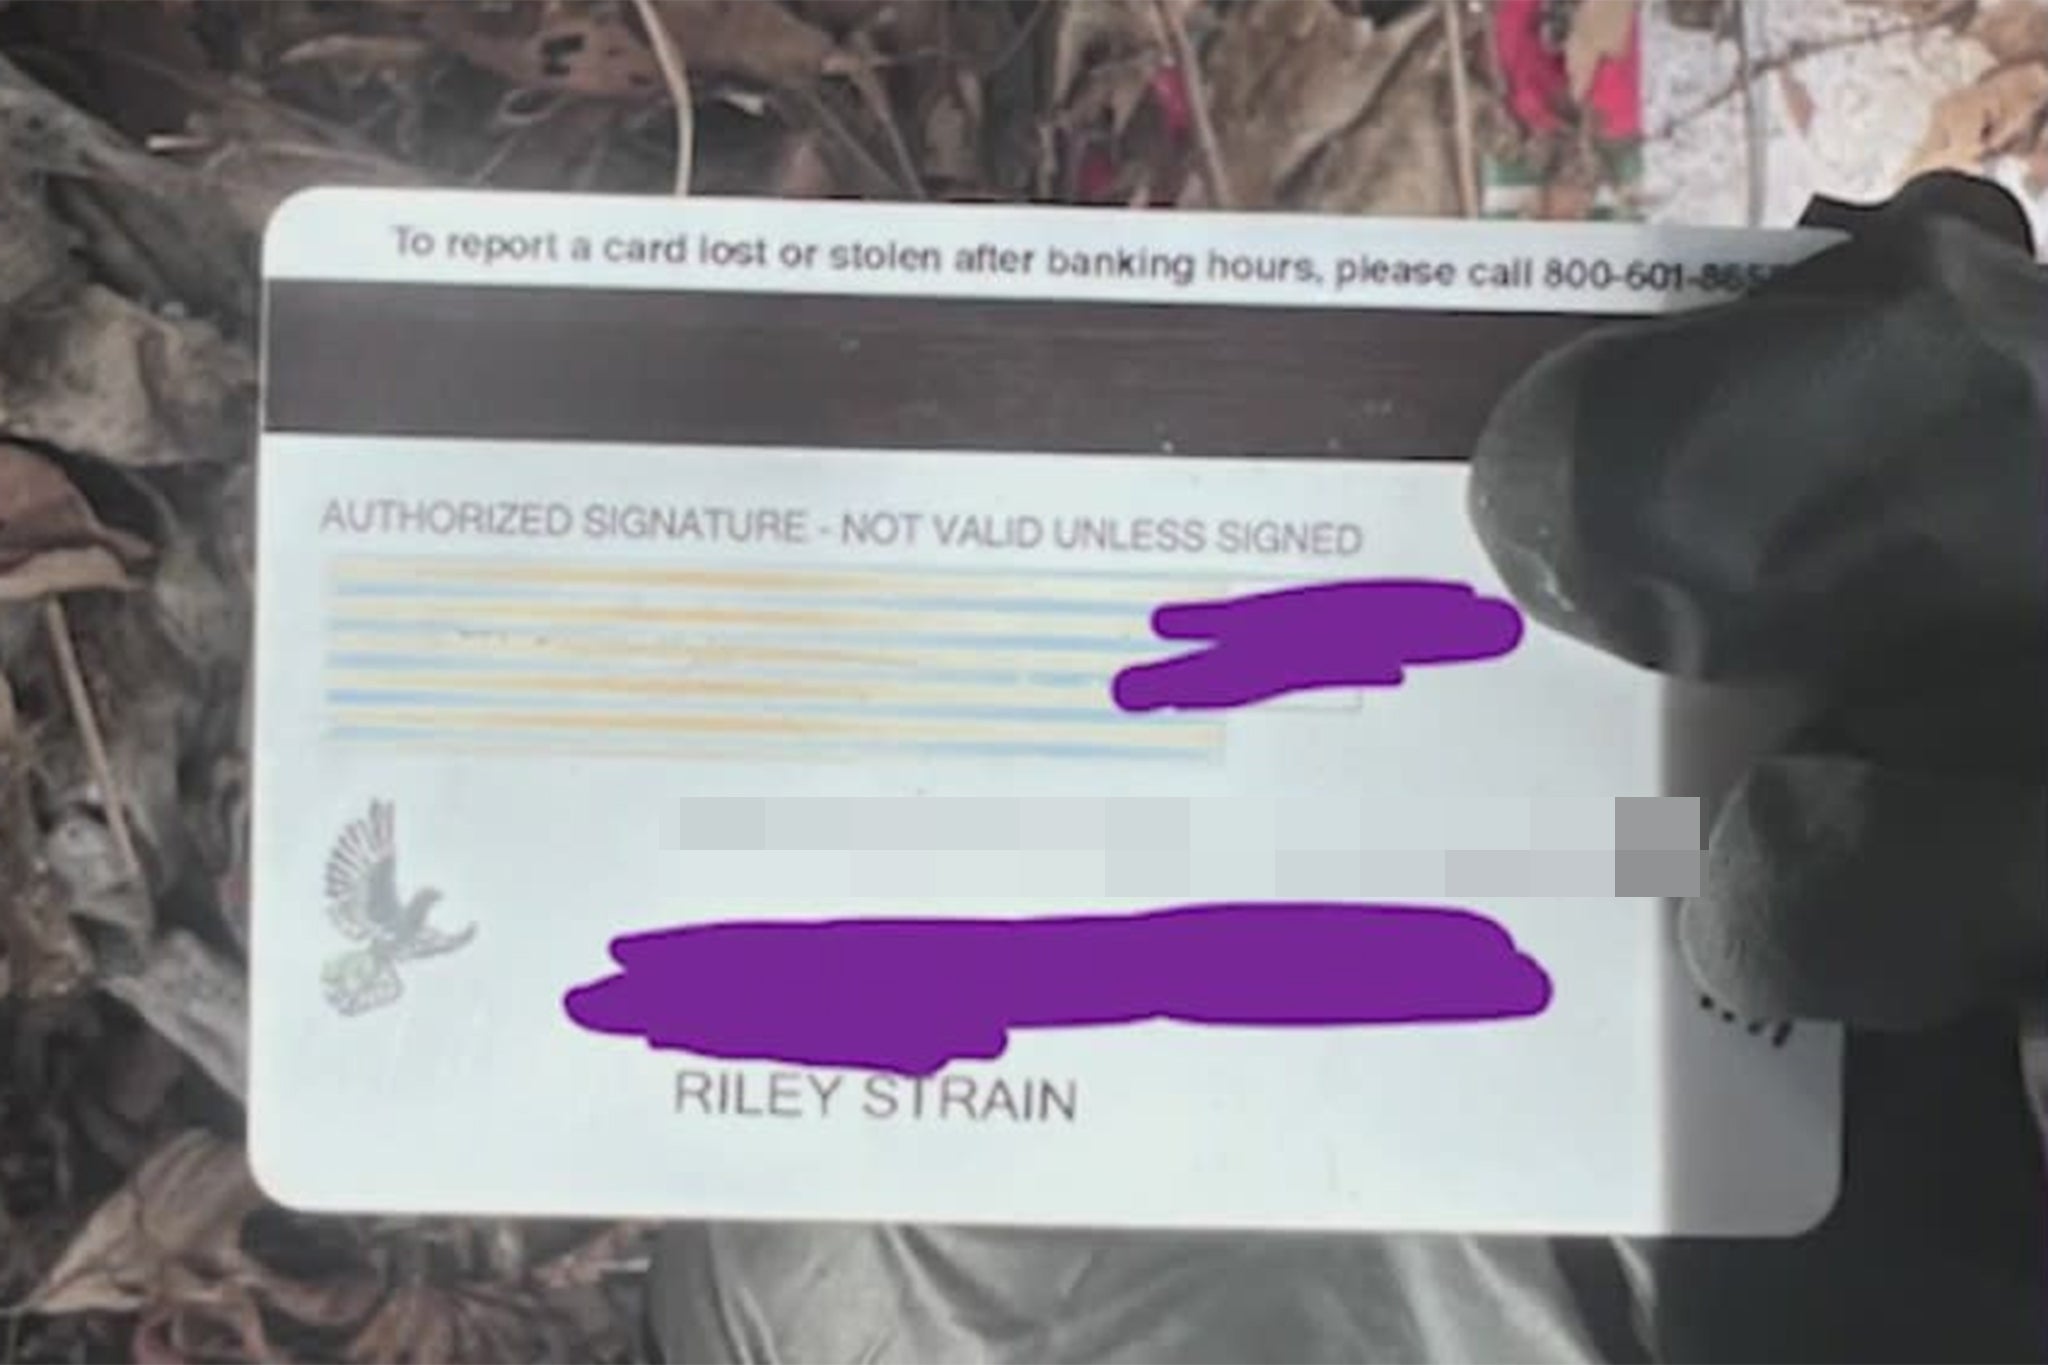 Riley Strain’s debit card was found by two TikTokkers on Sunday